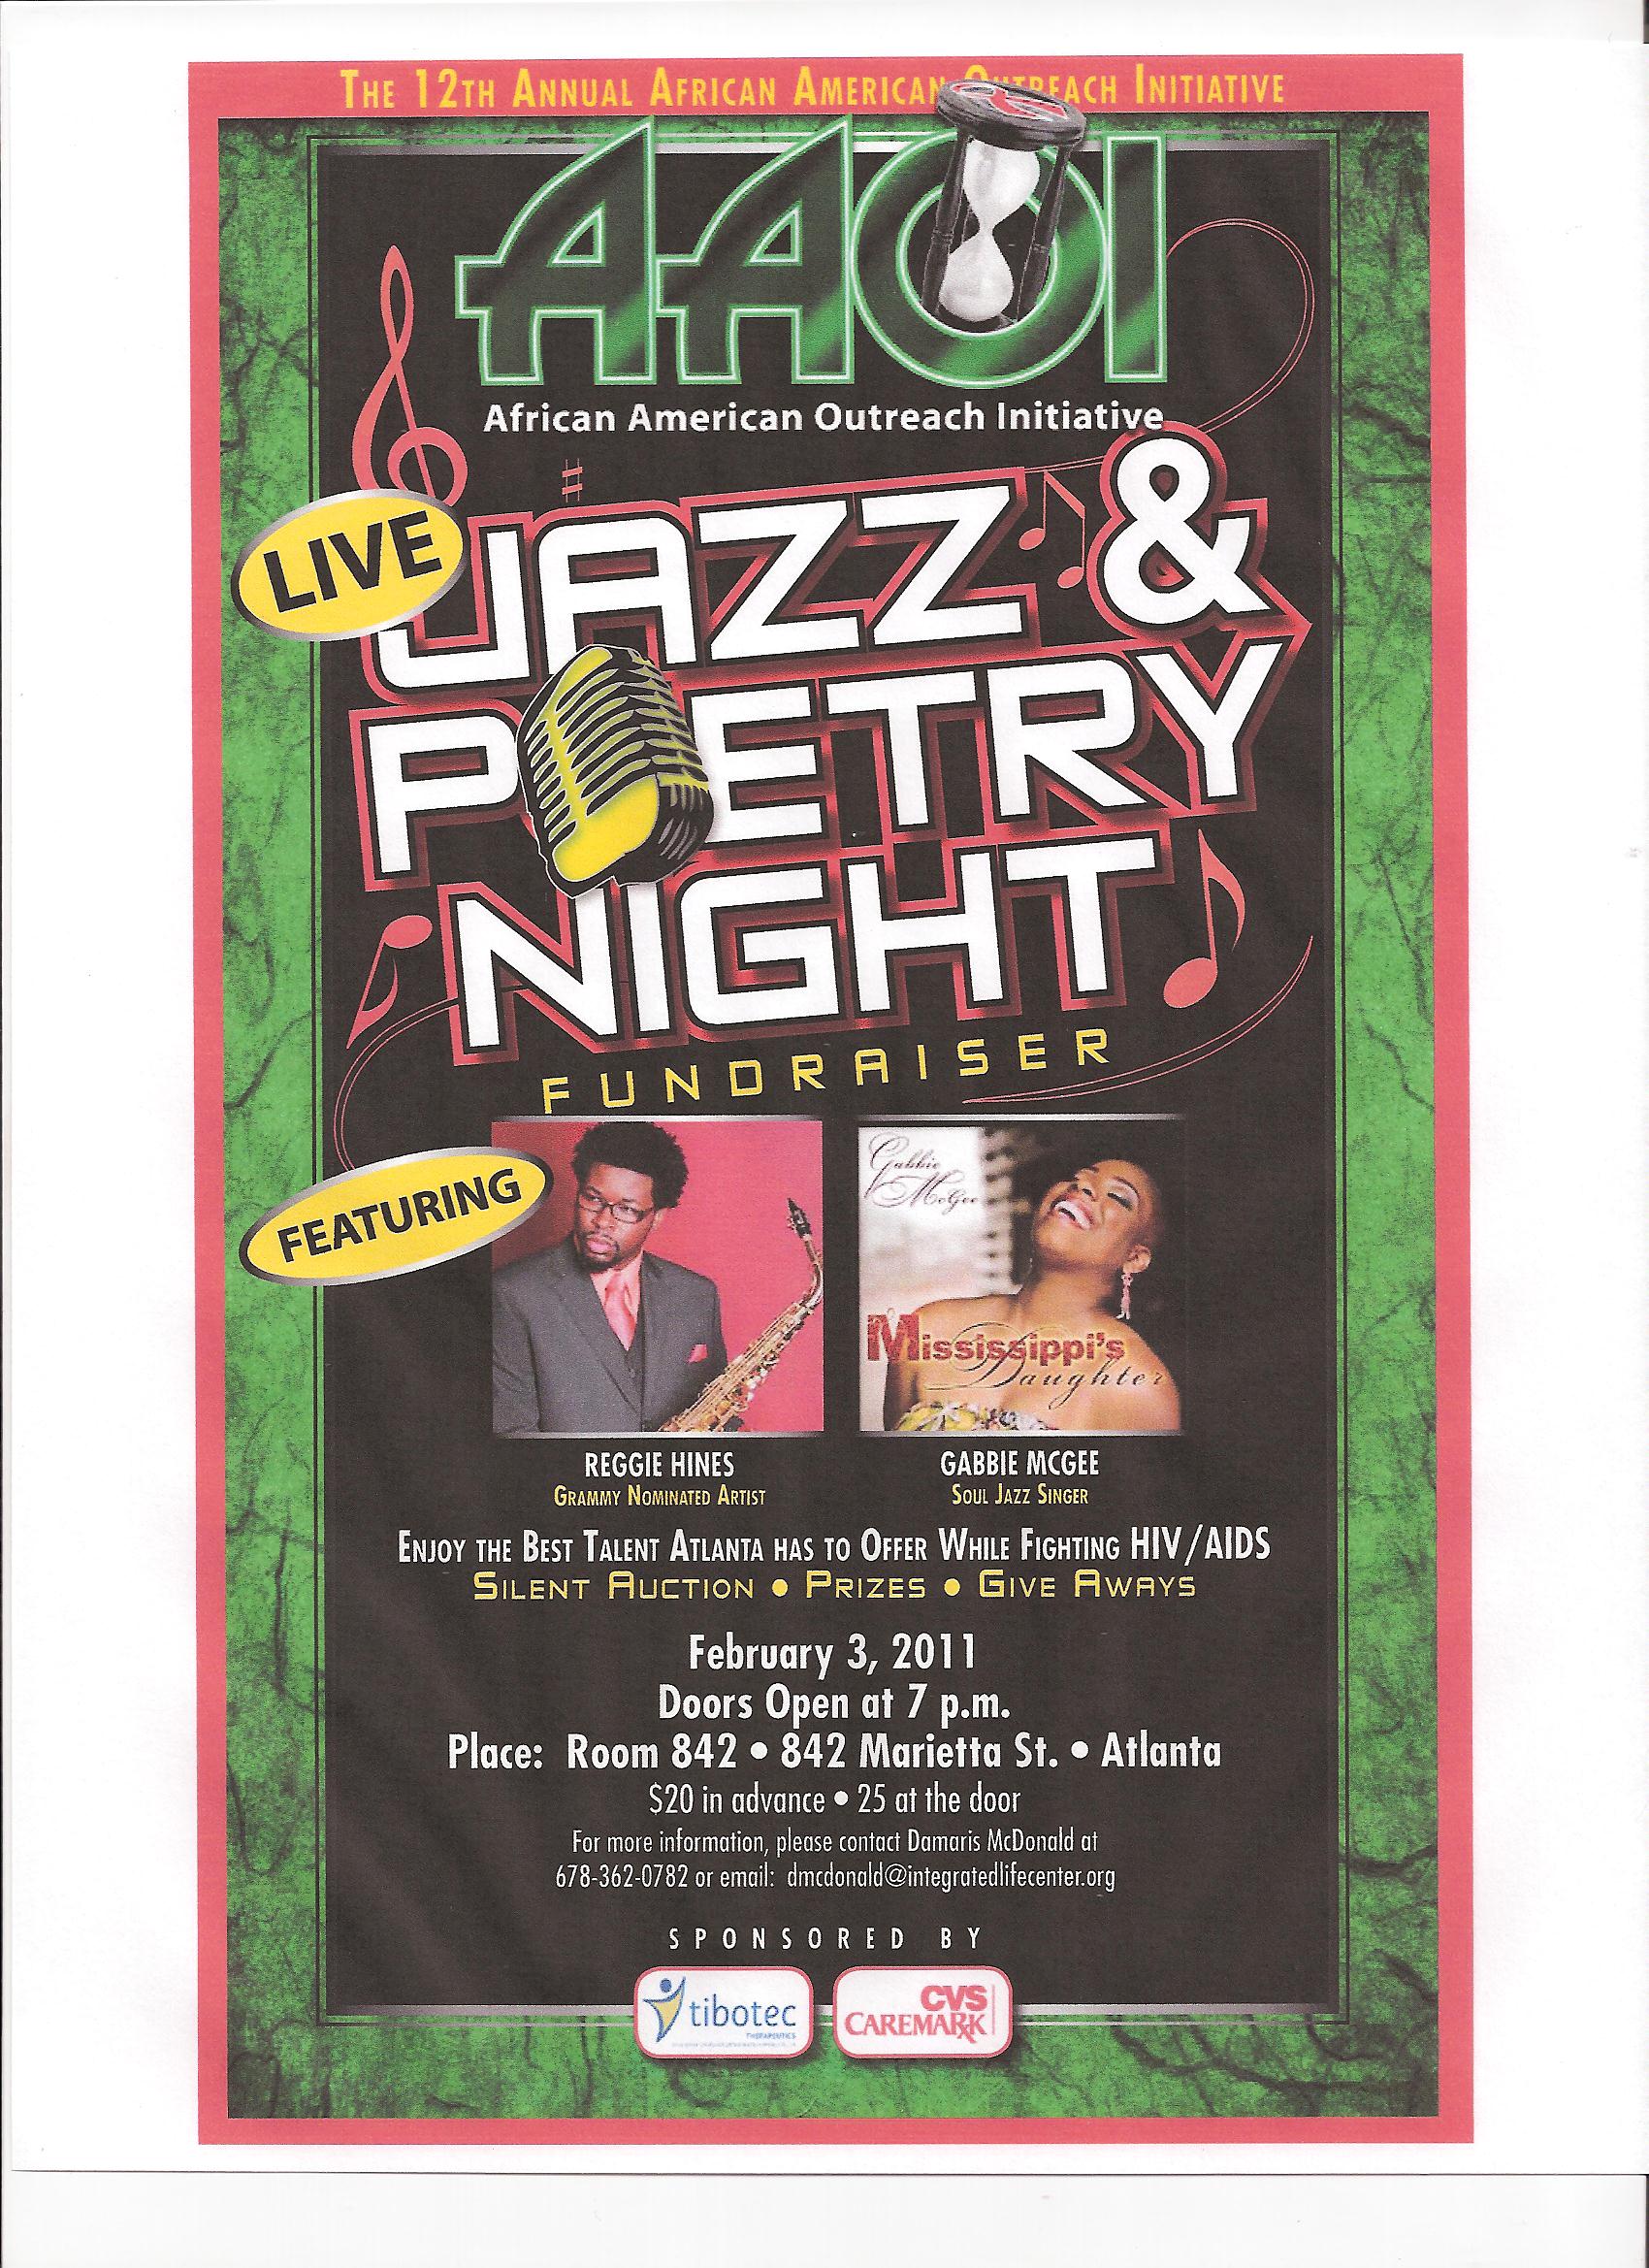 African American Outreach Initiative (AAOI) Jazz & Poetry Night Fundraiser